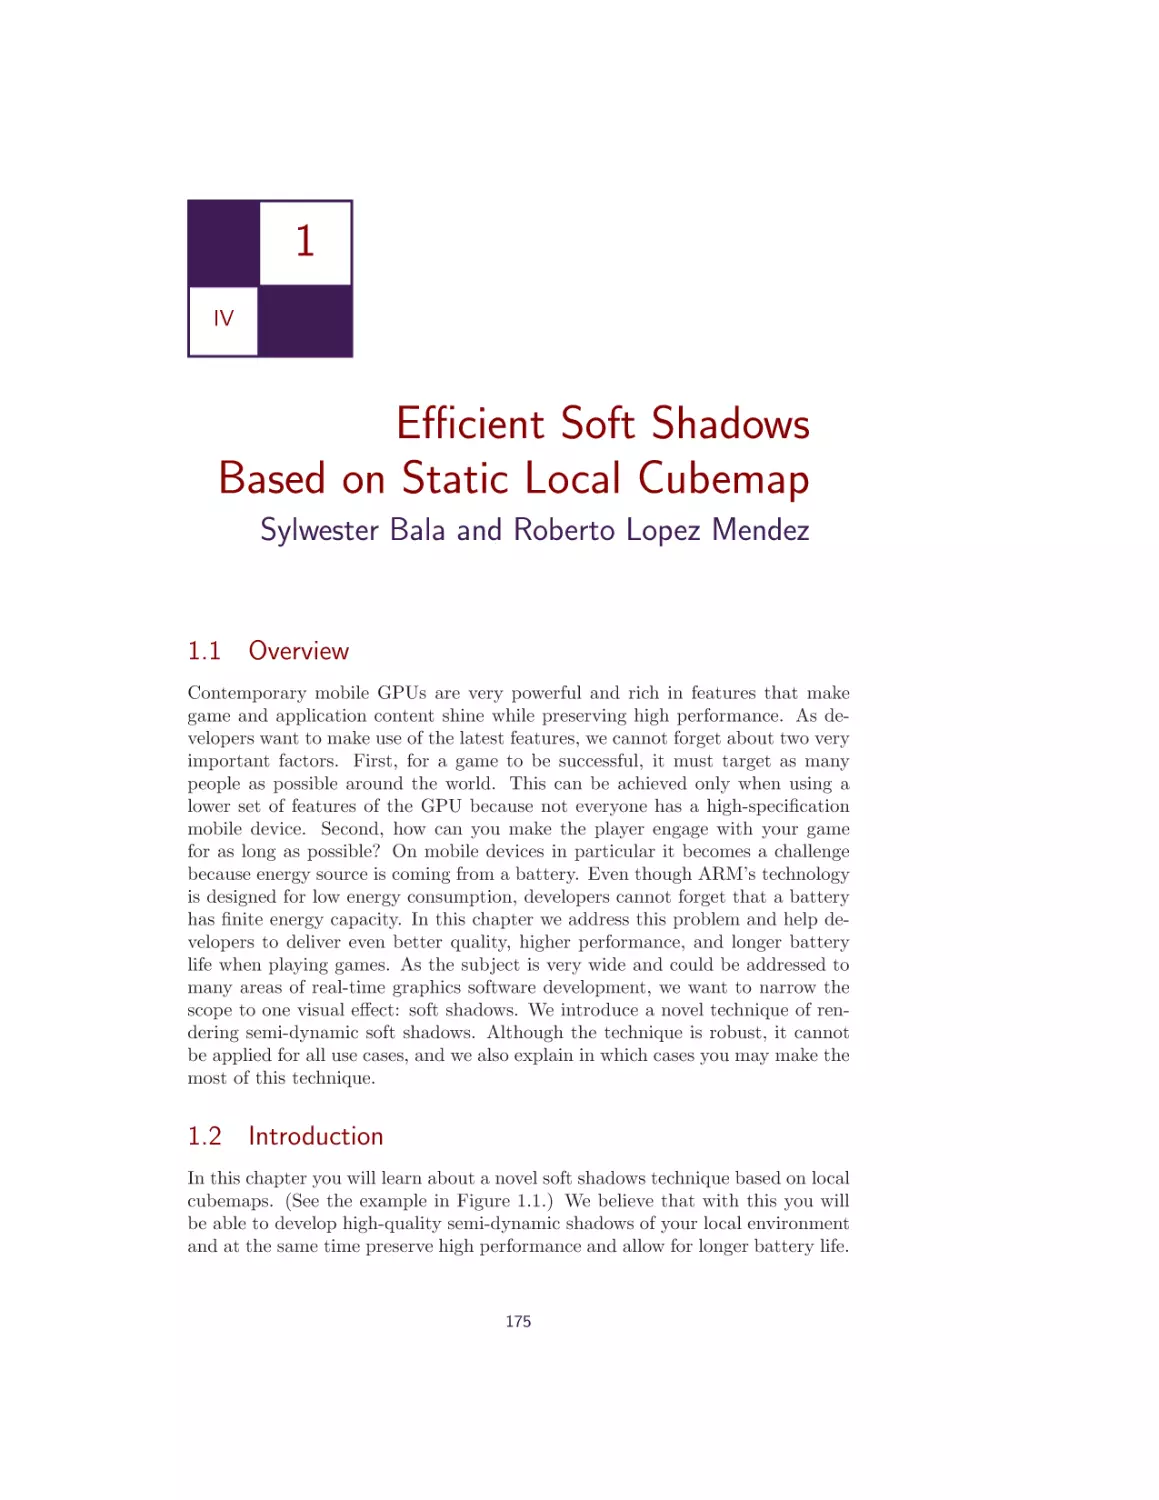 1. Efficient Soft Shadows Based on Static Local Cubemap